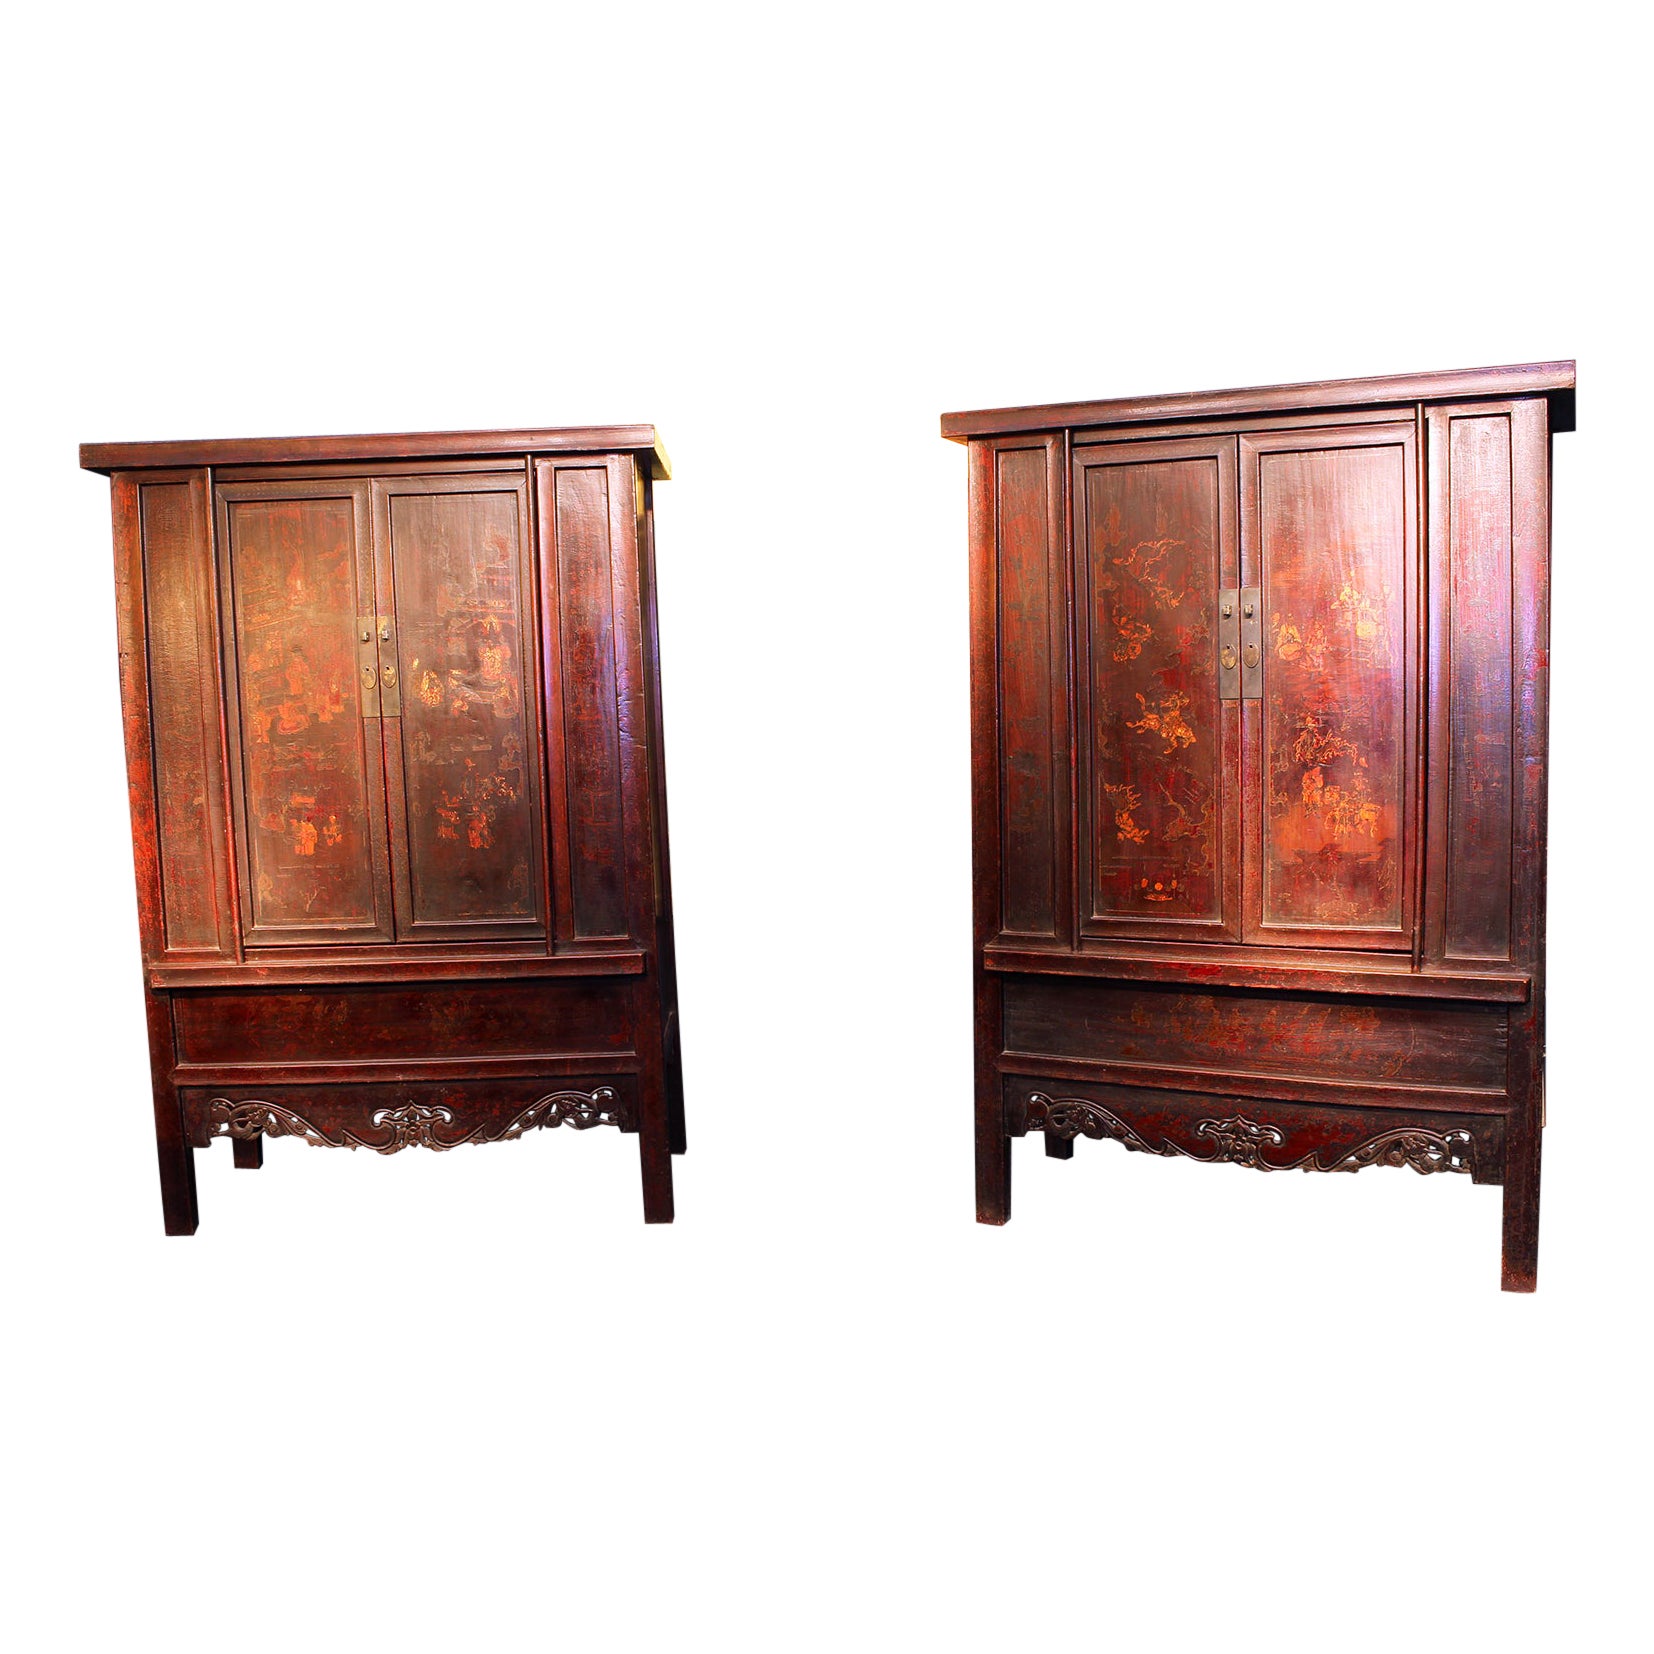 Pair of Chinese Red Gilded Lacquered Bookcase Cabinets from the 18th Century